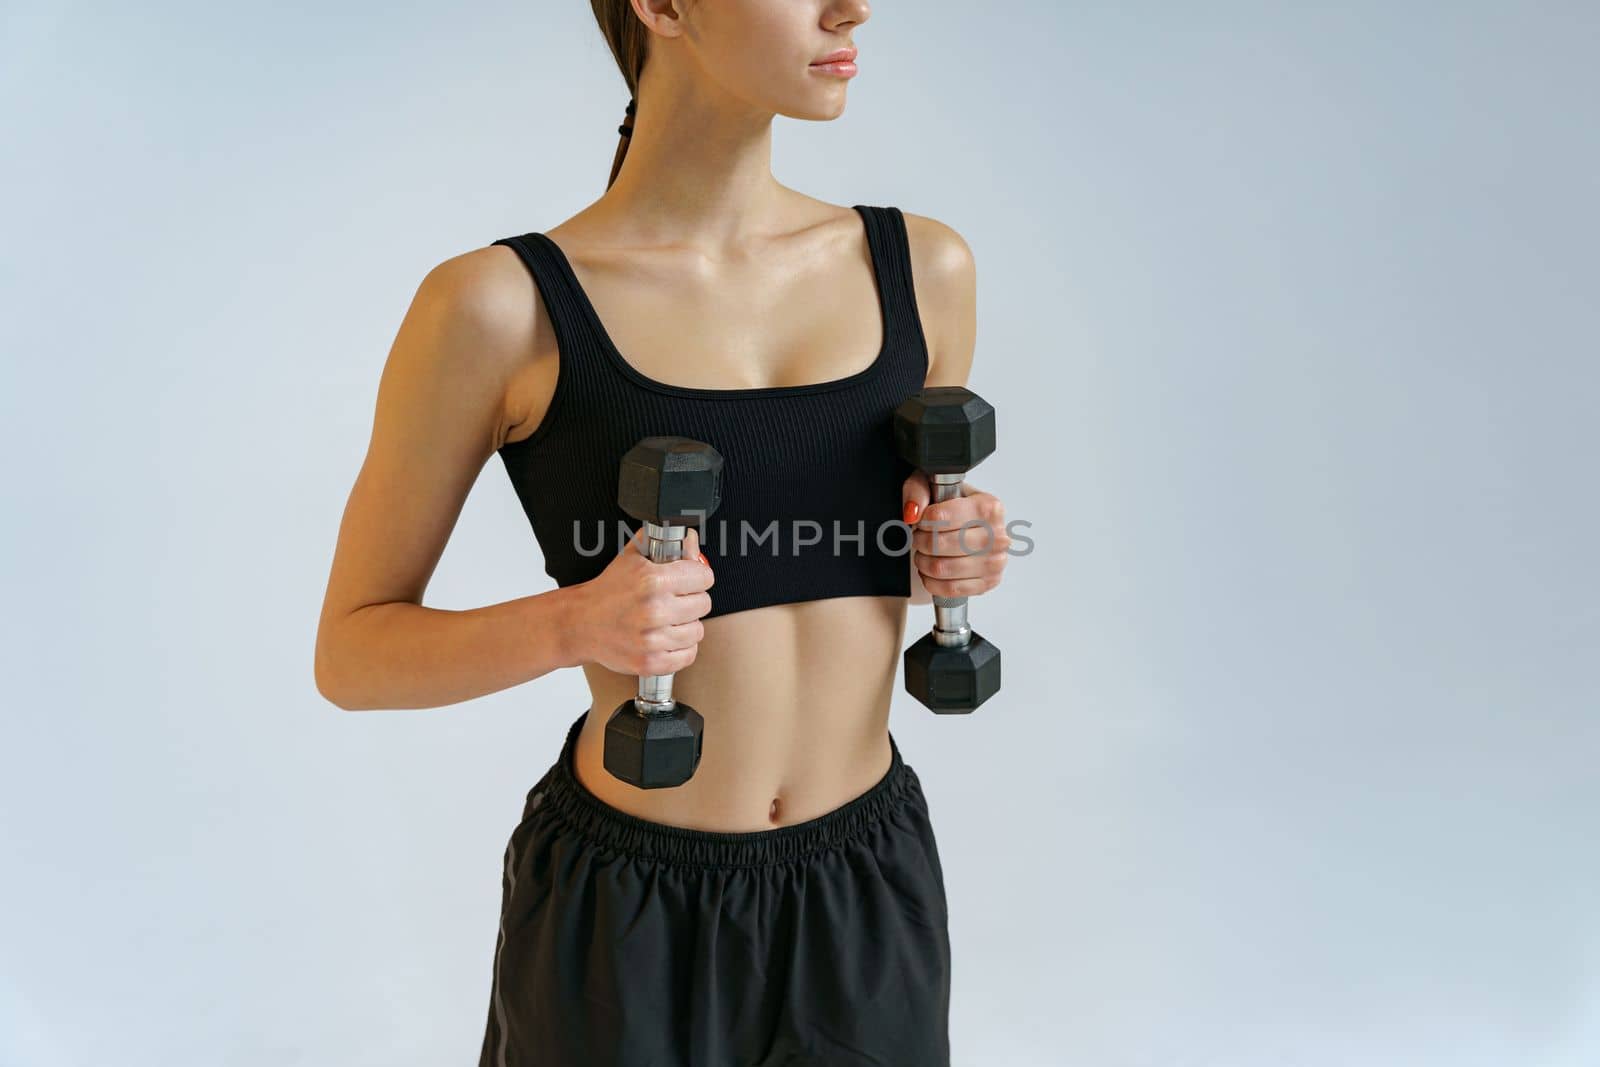 Woman doing exercises with dumbbells for hands training on studio background . Healthy lifestyle